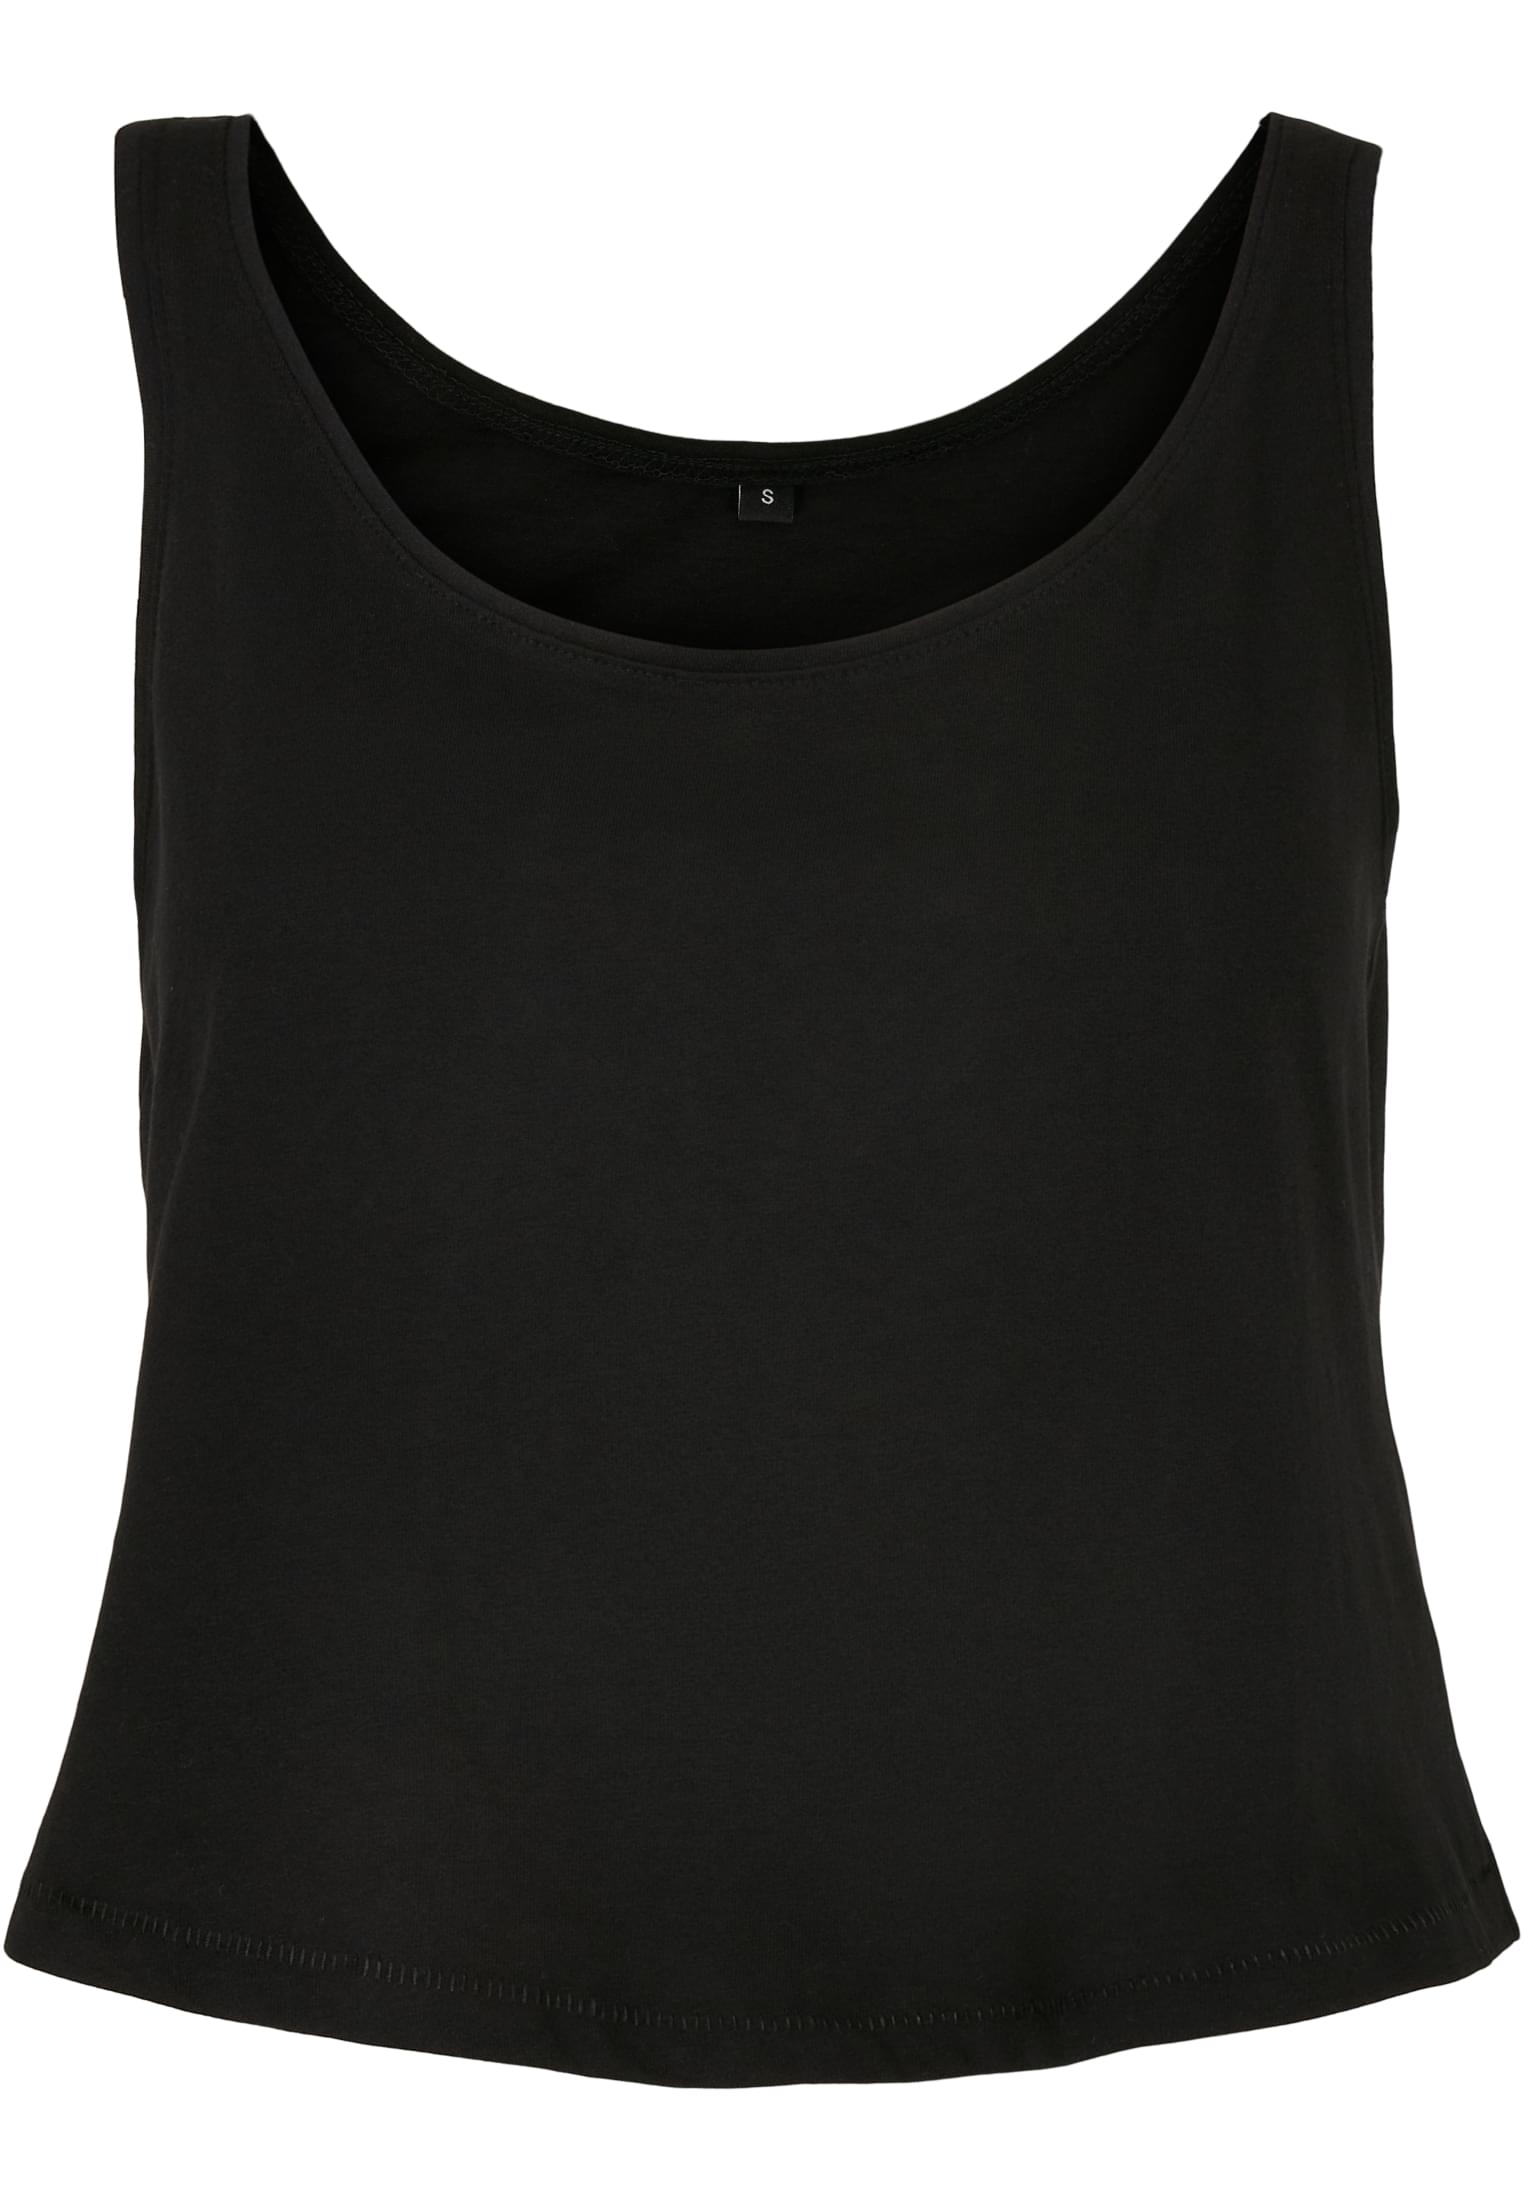 Tapehead city - Ladies black soft style tank top [XL only